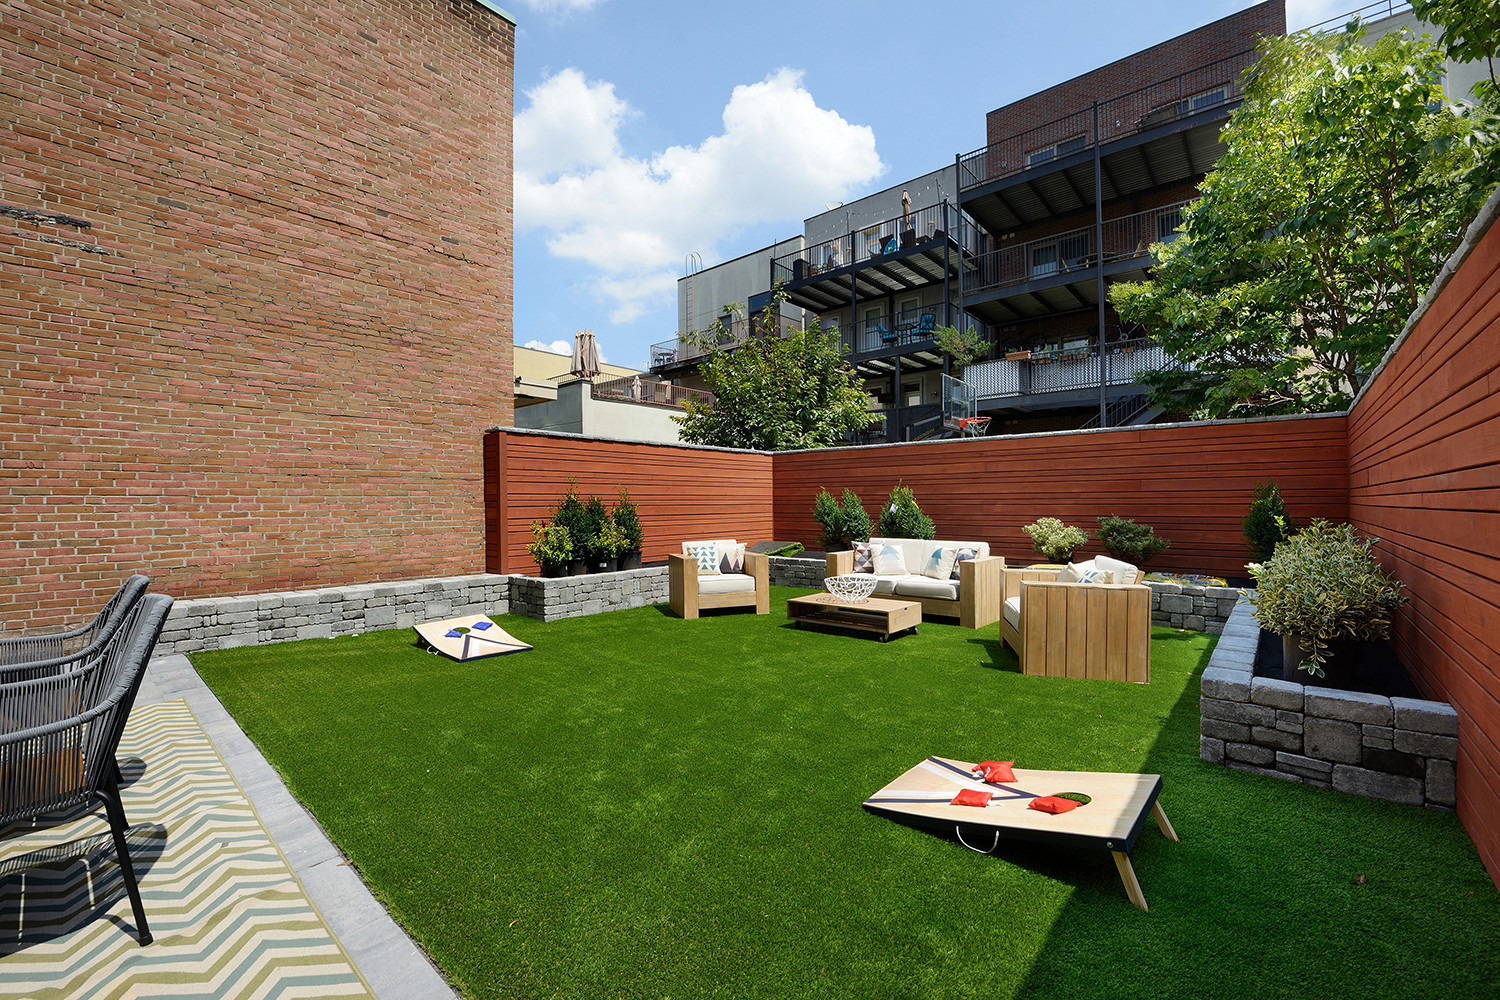 800 Sq Ft Landscaping Ideas Houzz